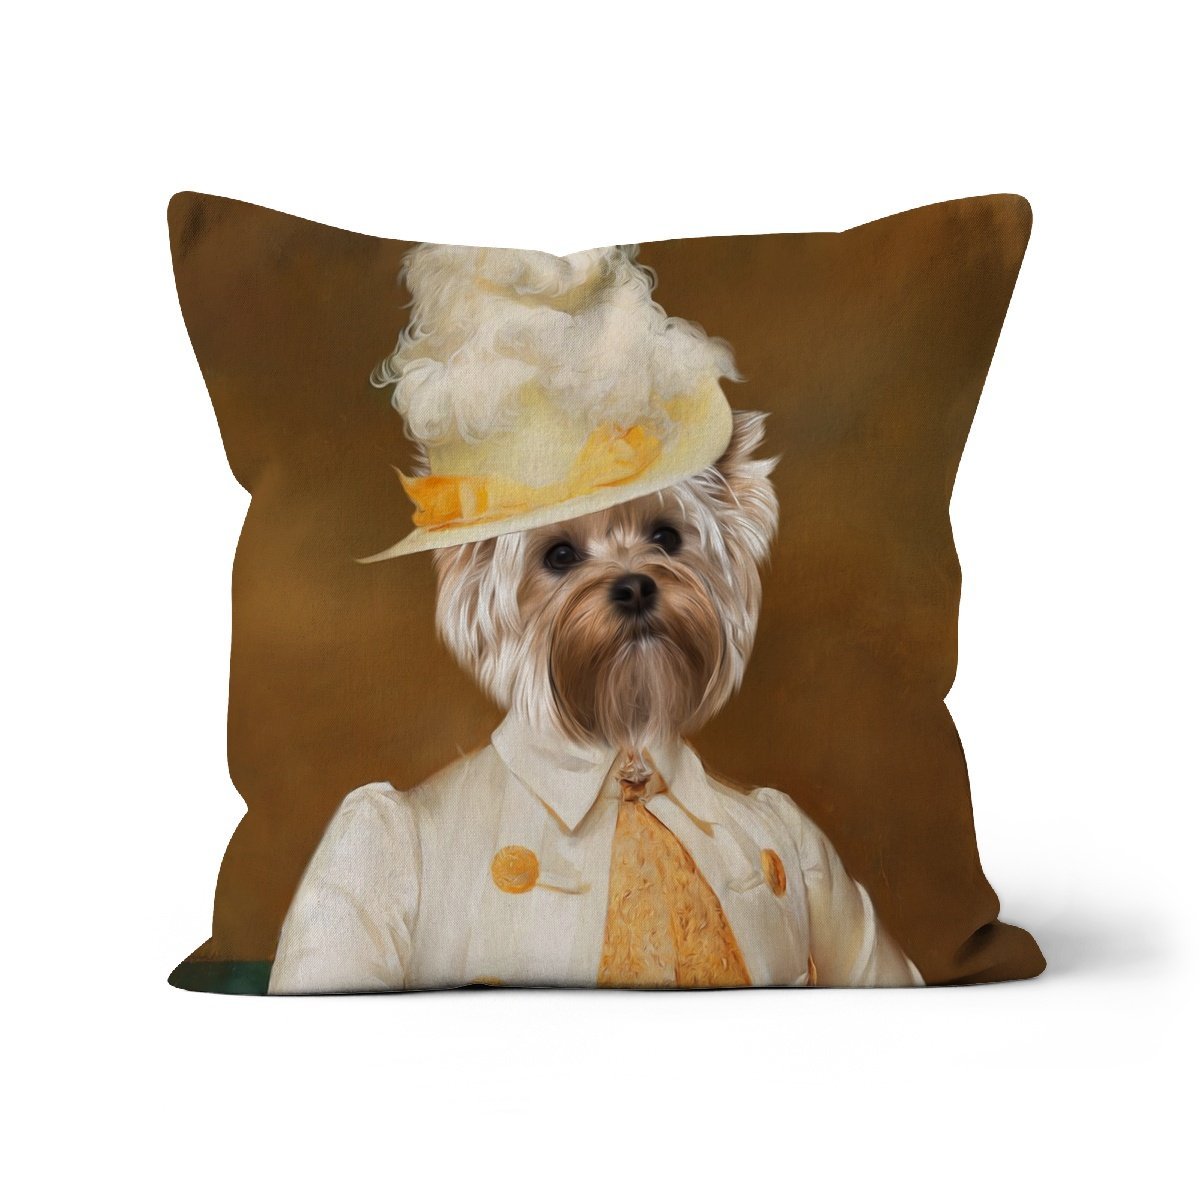 The Cherry Picker: Custom Pet Throw Pillow - Paw & Glory - #pet portraits# - #dog portraits# - #pet portraits uk#pawandglory, pet art pillow,pillow personalized, pet face pillows, dog photo on pillow, pet custom pillow, pillows with dogs picture